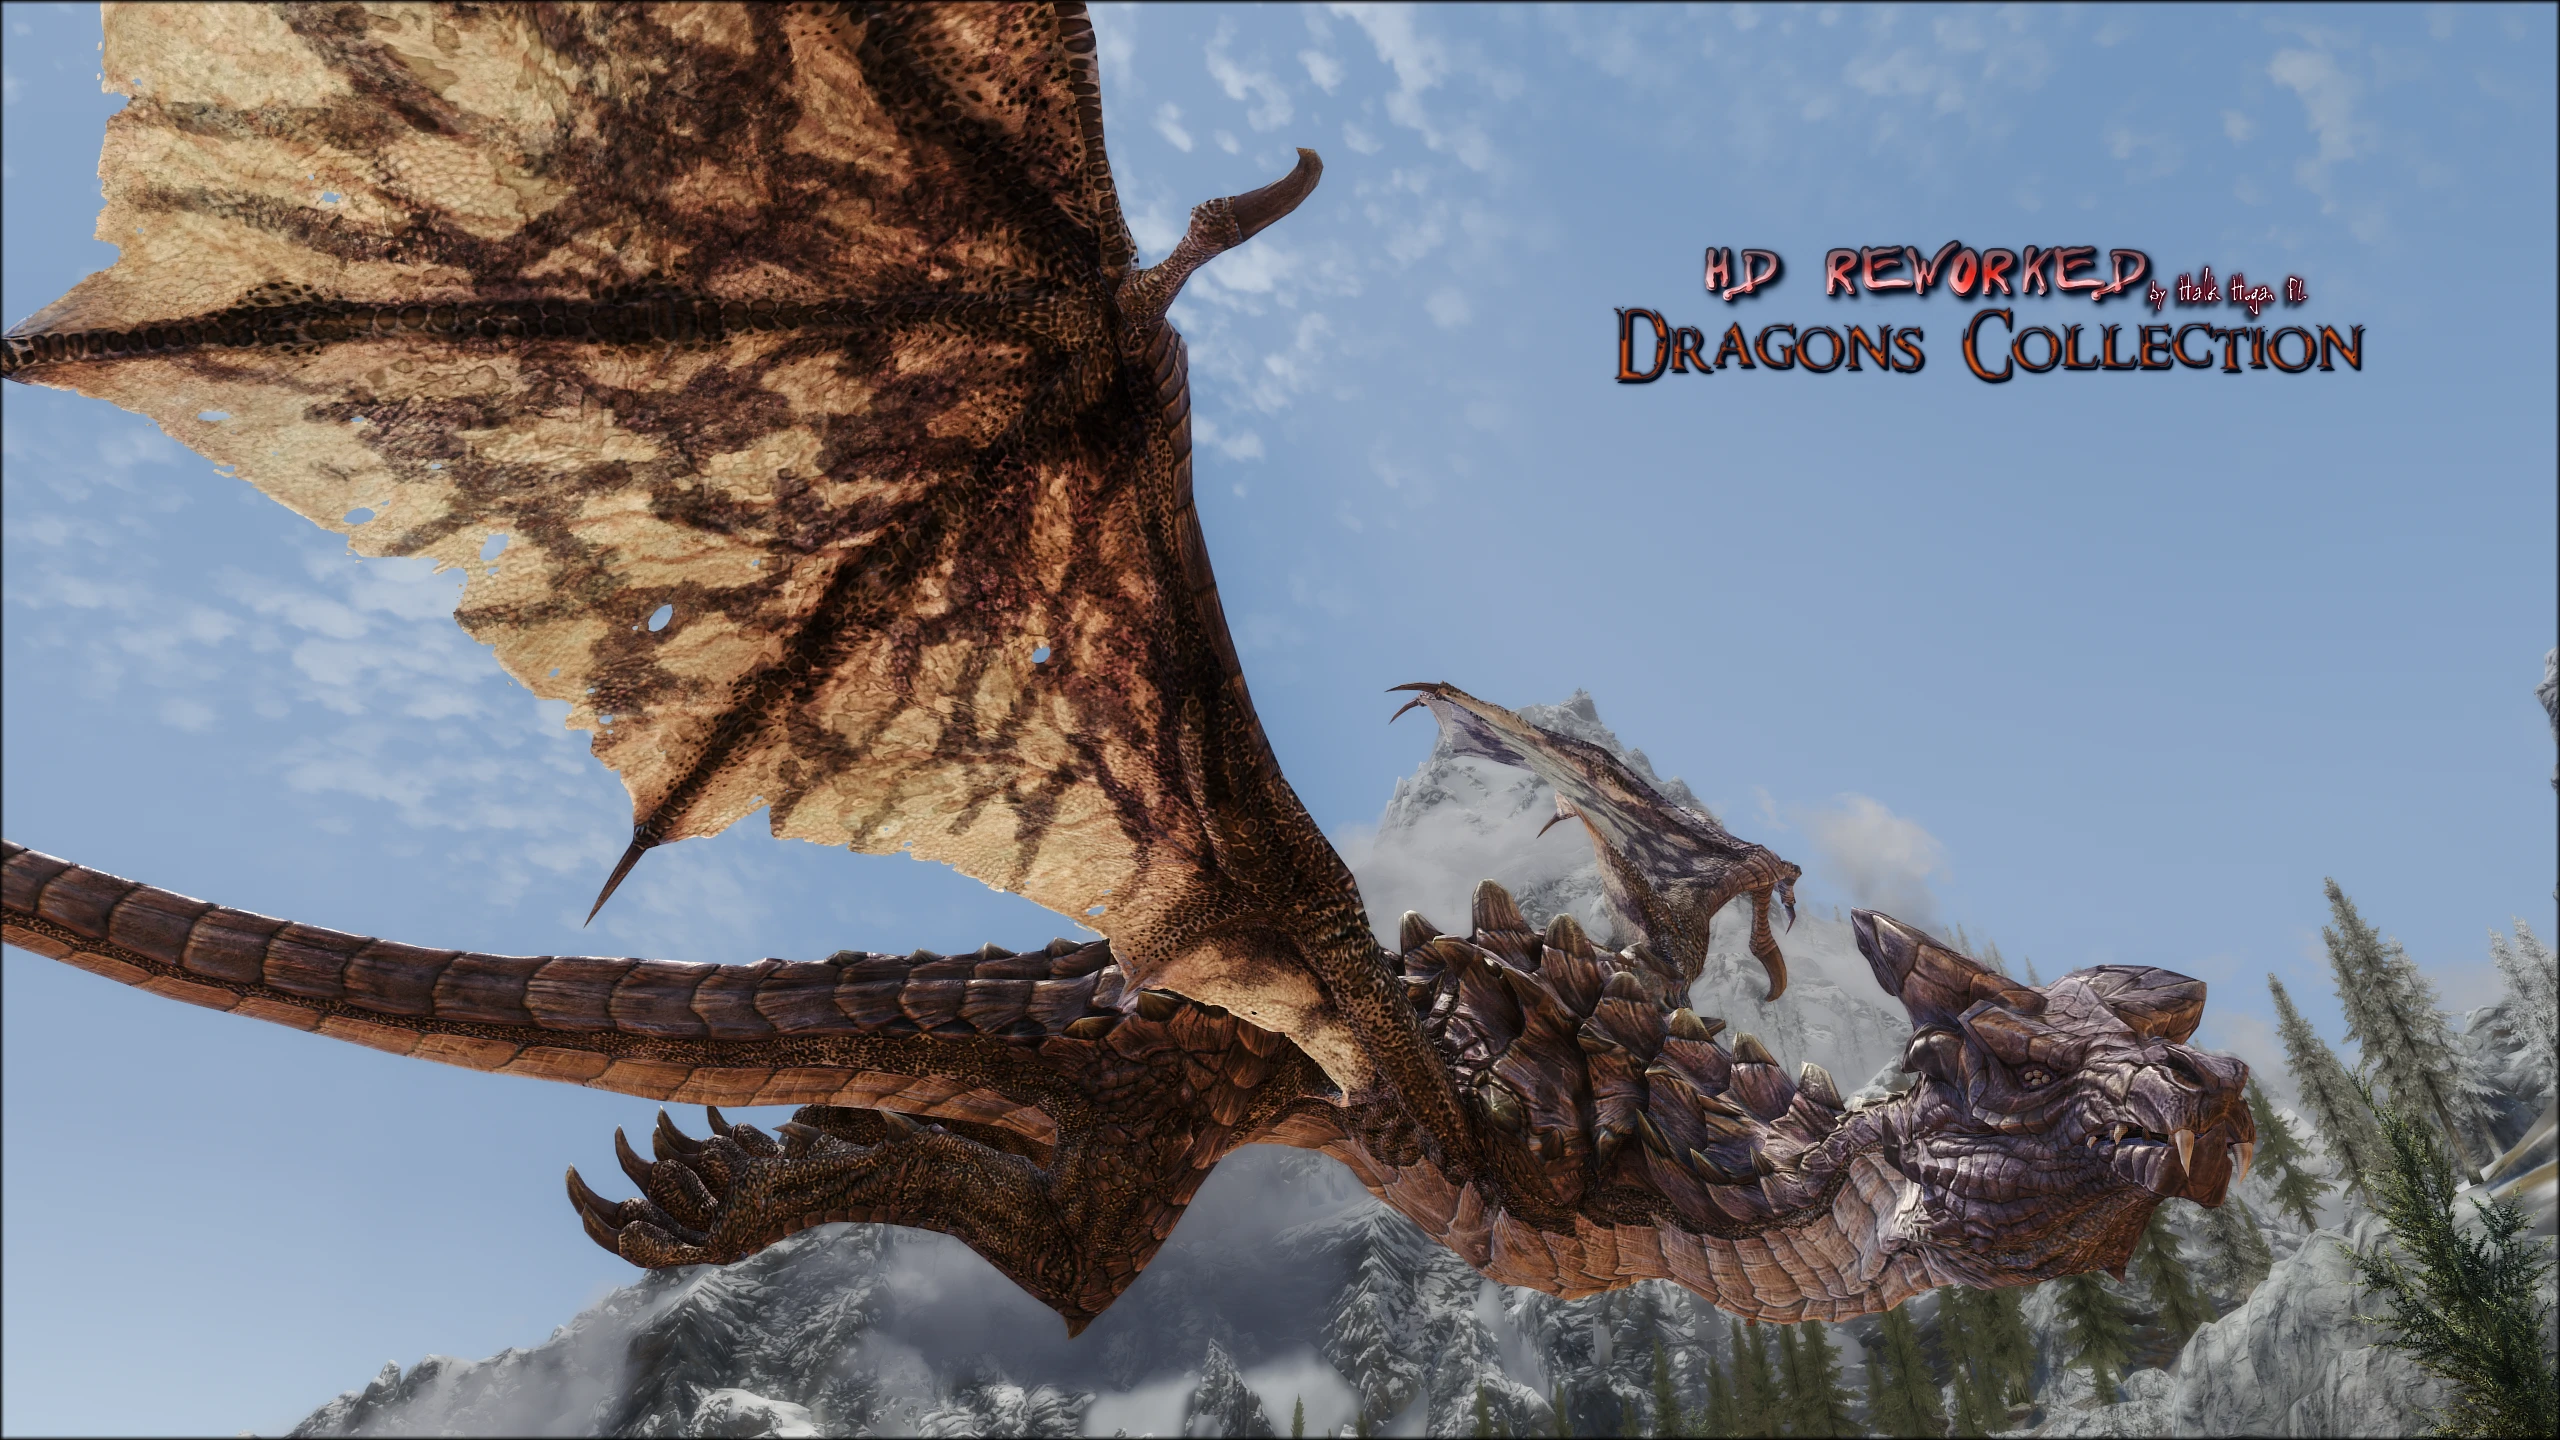 hd reworked dragons collection 4k